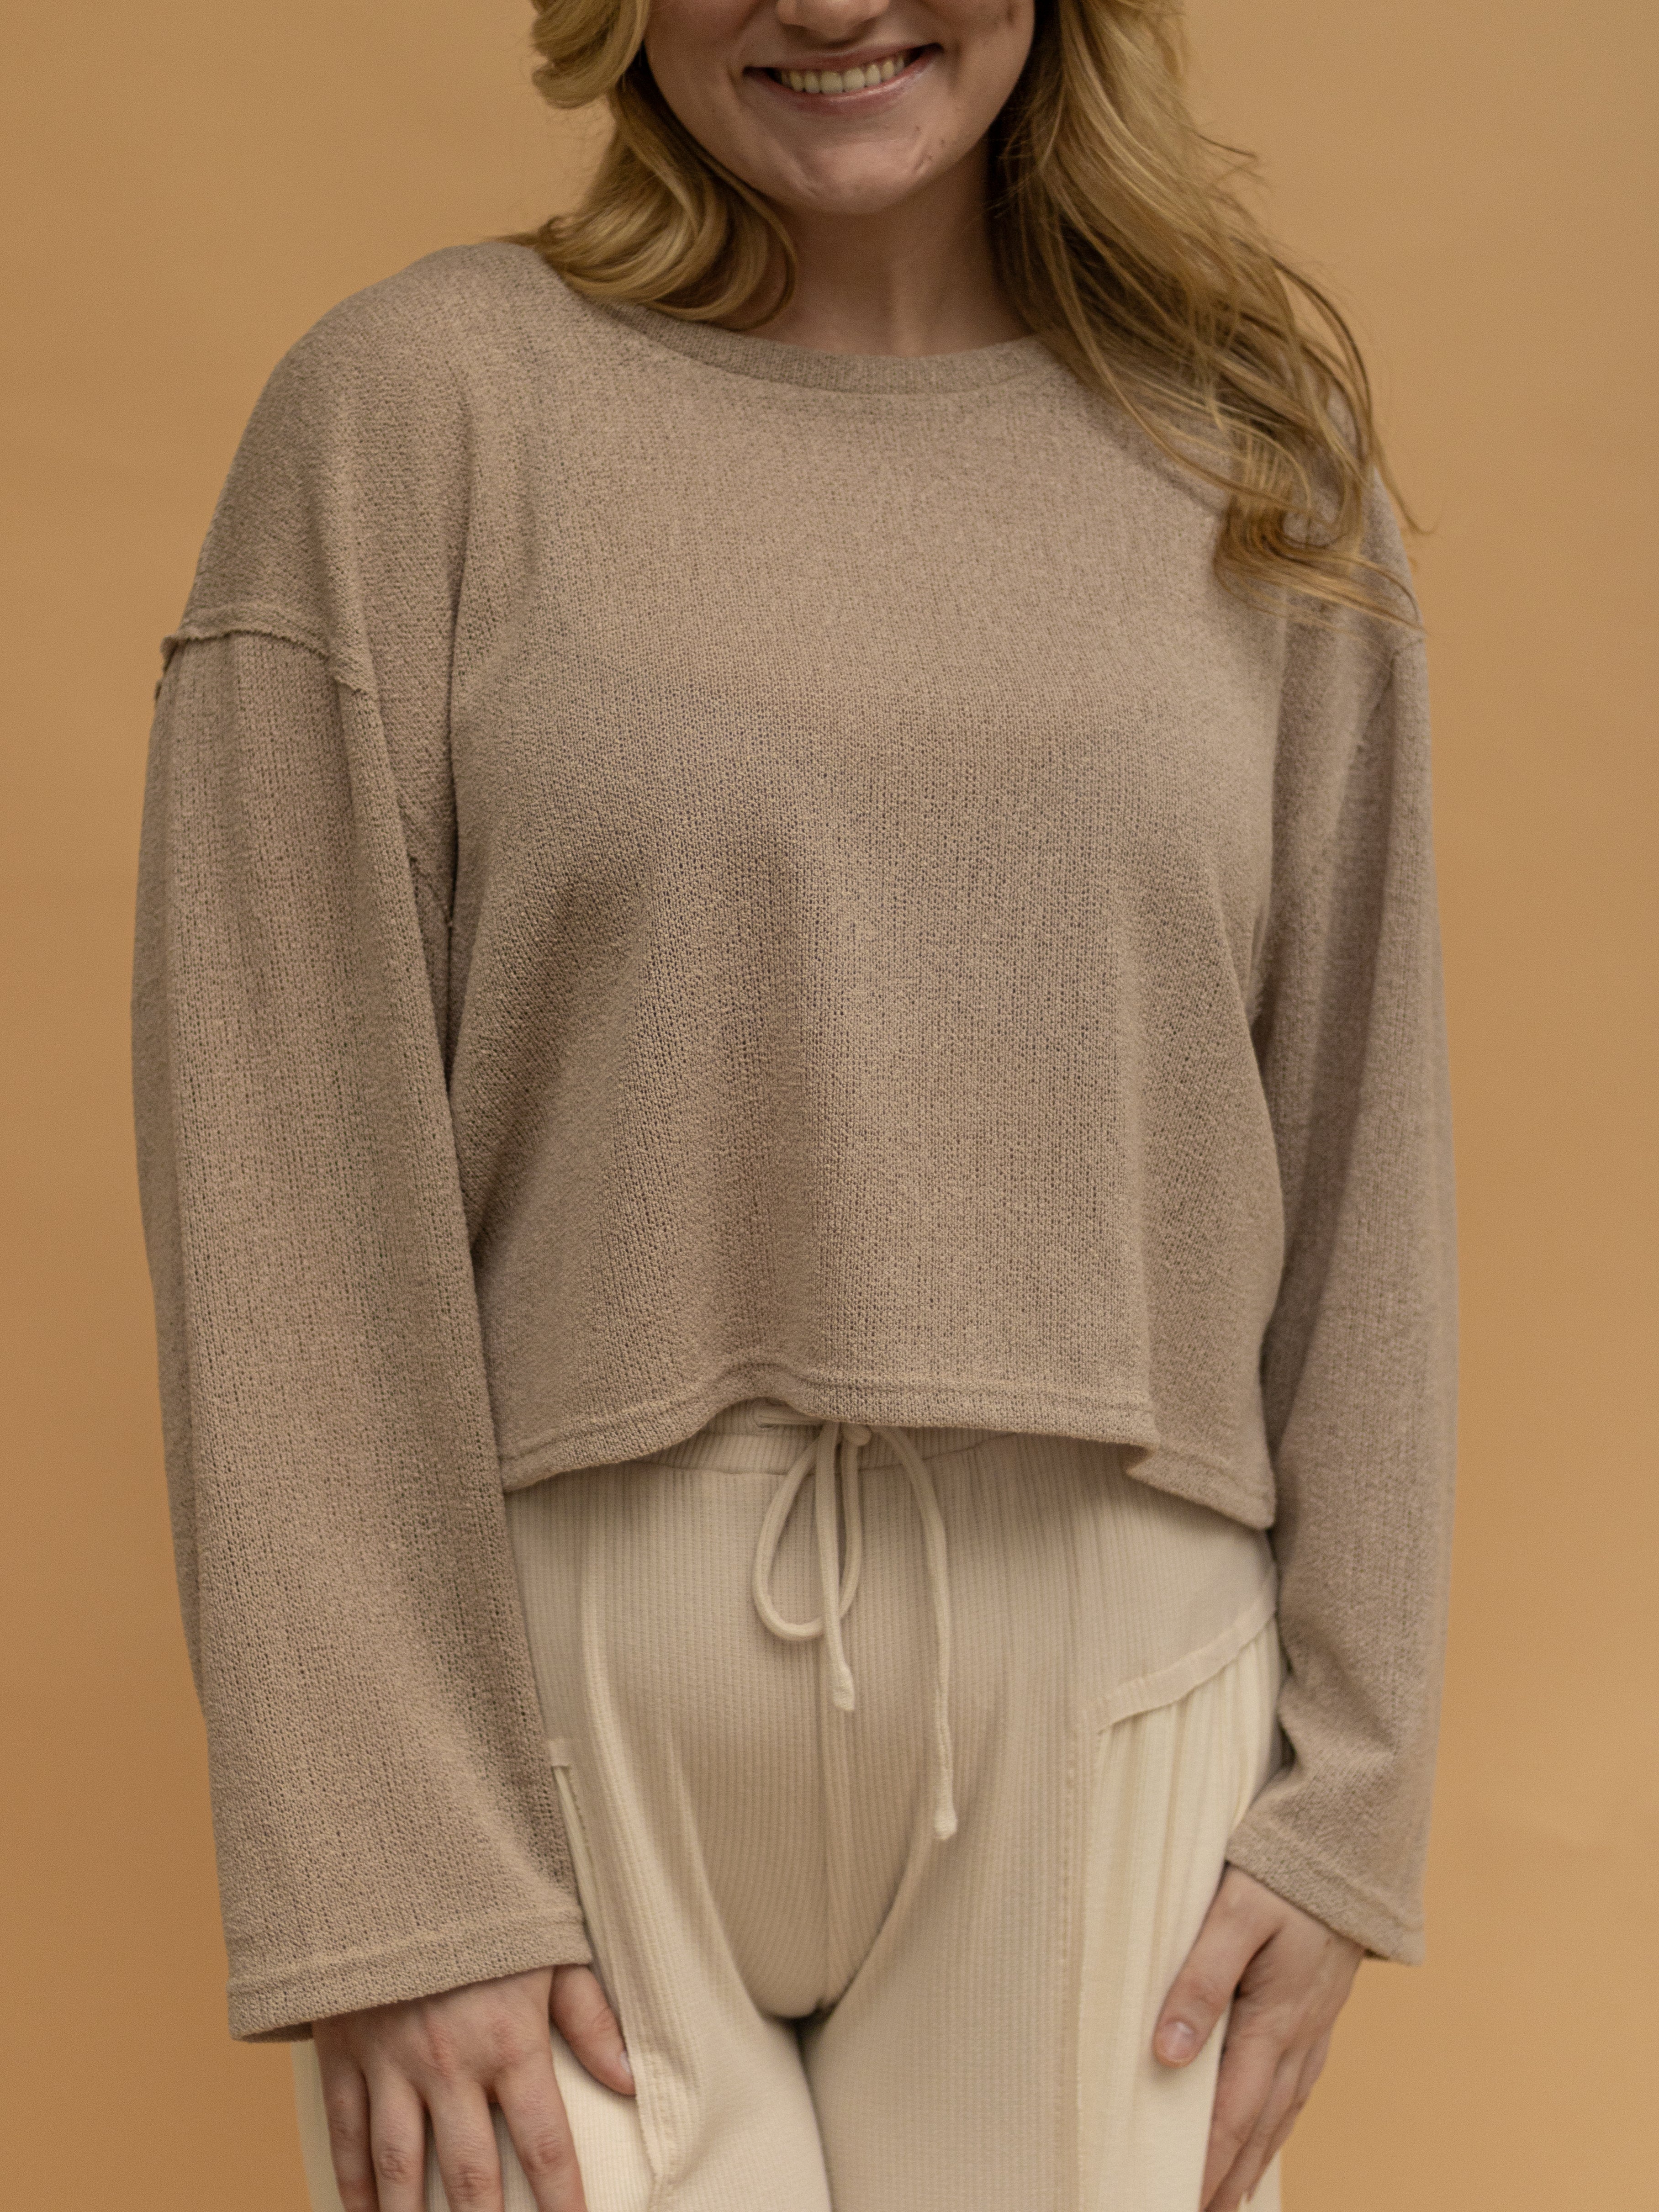 Vacay Time Lightweight Sweater Top - Beige